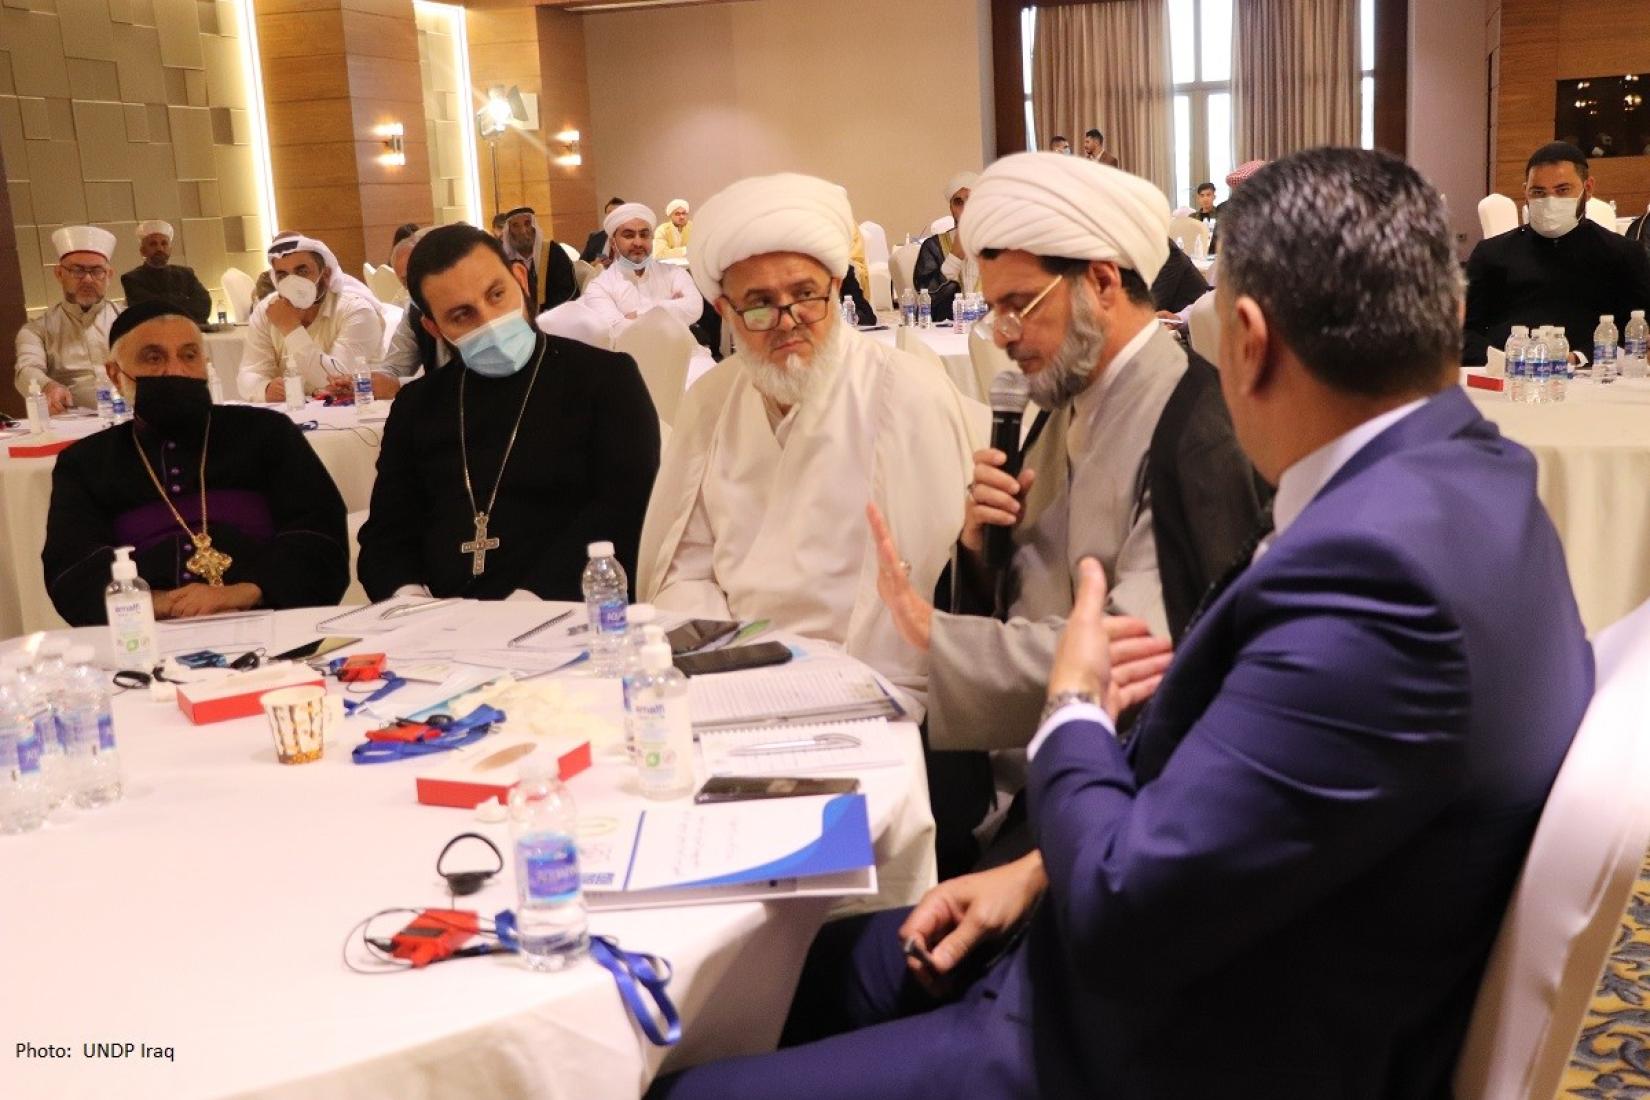 UNDP Iraq hosts Interfaith Religious Conference in Erbil on peaceful coexistence to encourage return and reintegration of the displaced